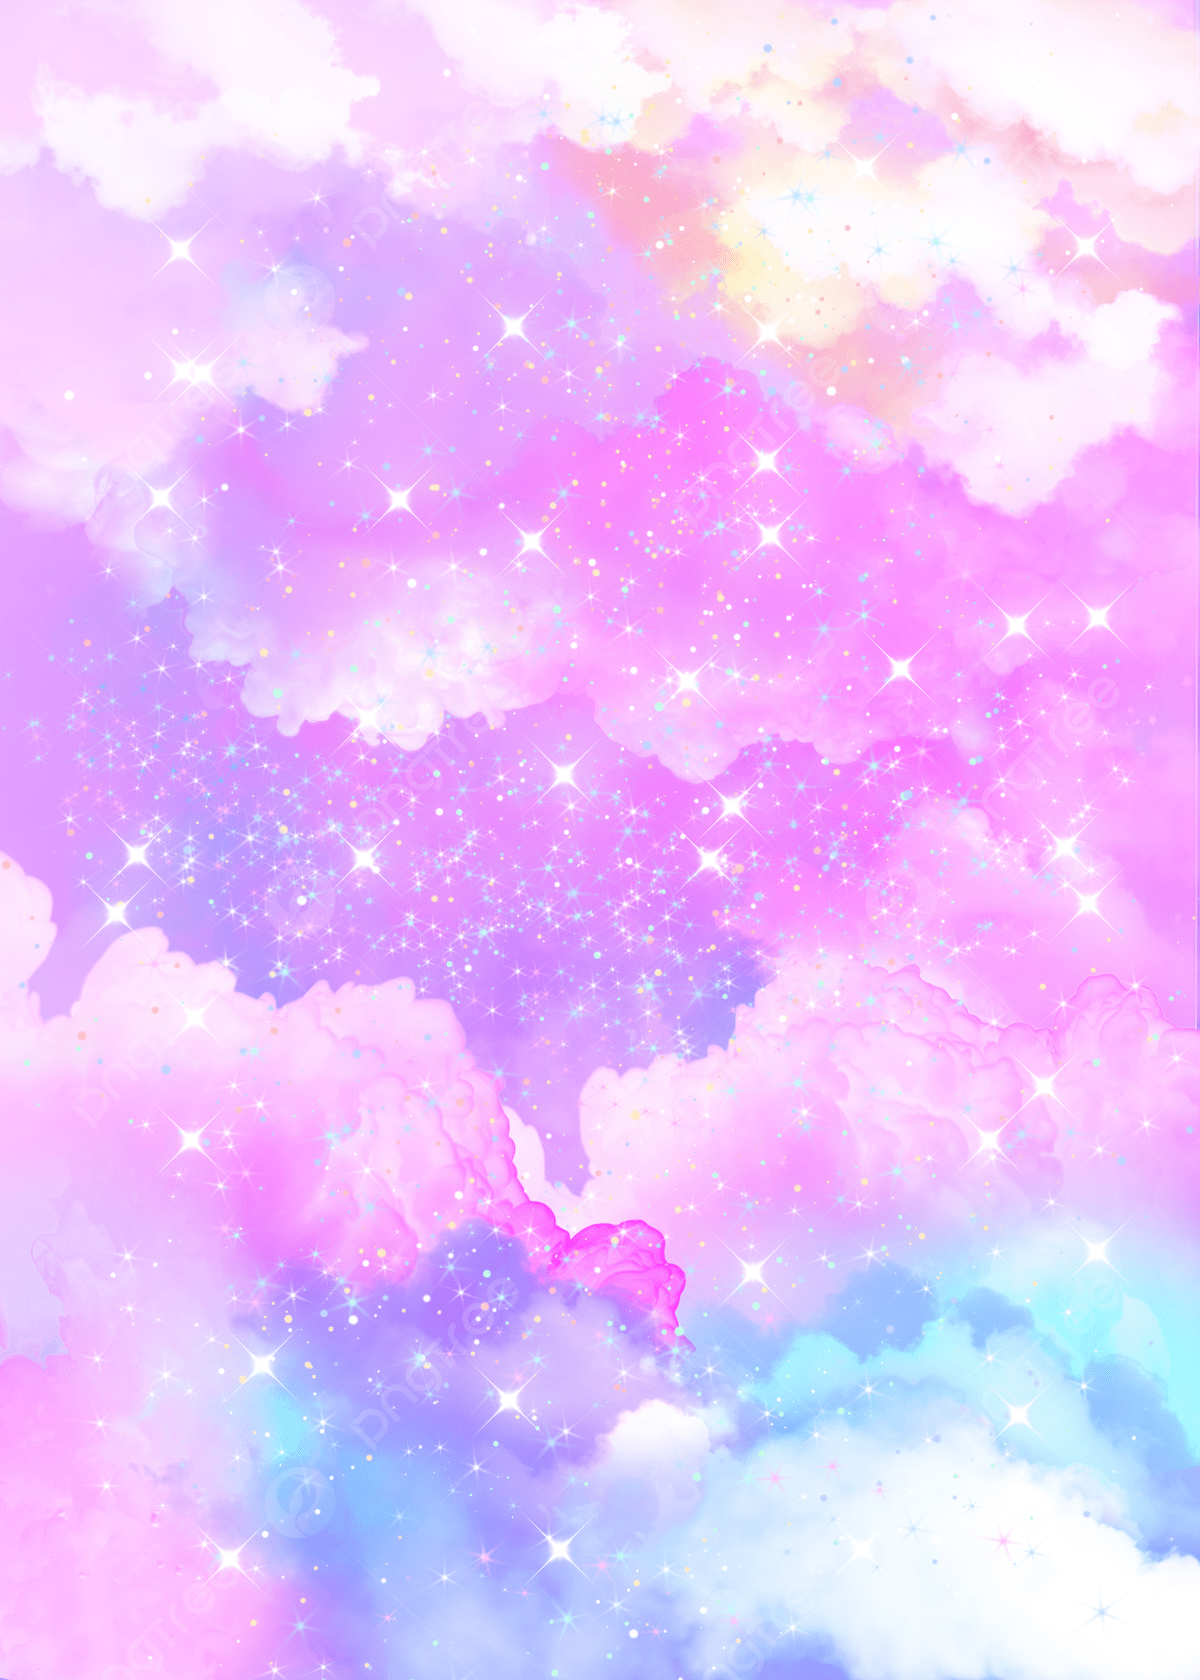 Purple Holographic Universe Cloud Colorful Background Wallpaper Image For Free Download